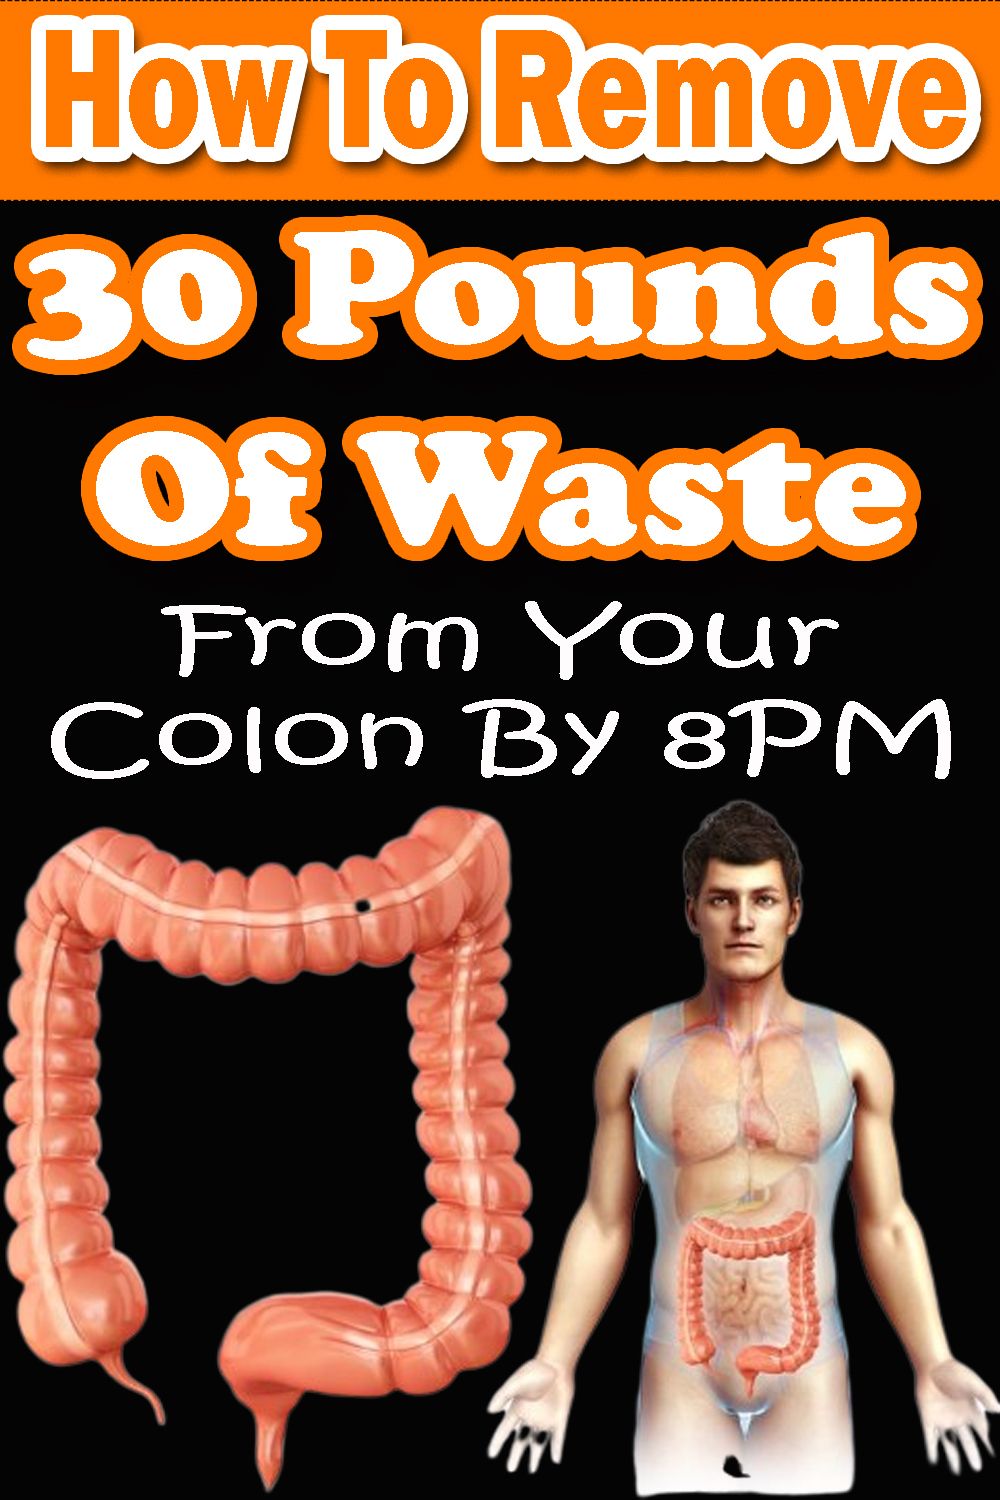 How To Remove 30 Pounds Of #waste From Your #colon By 8PM